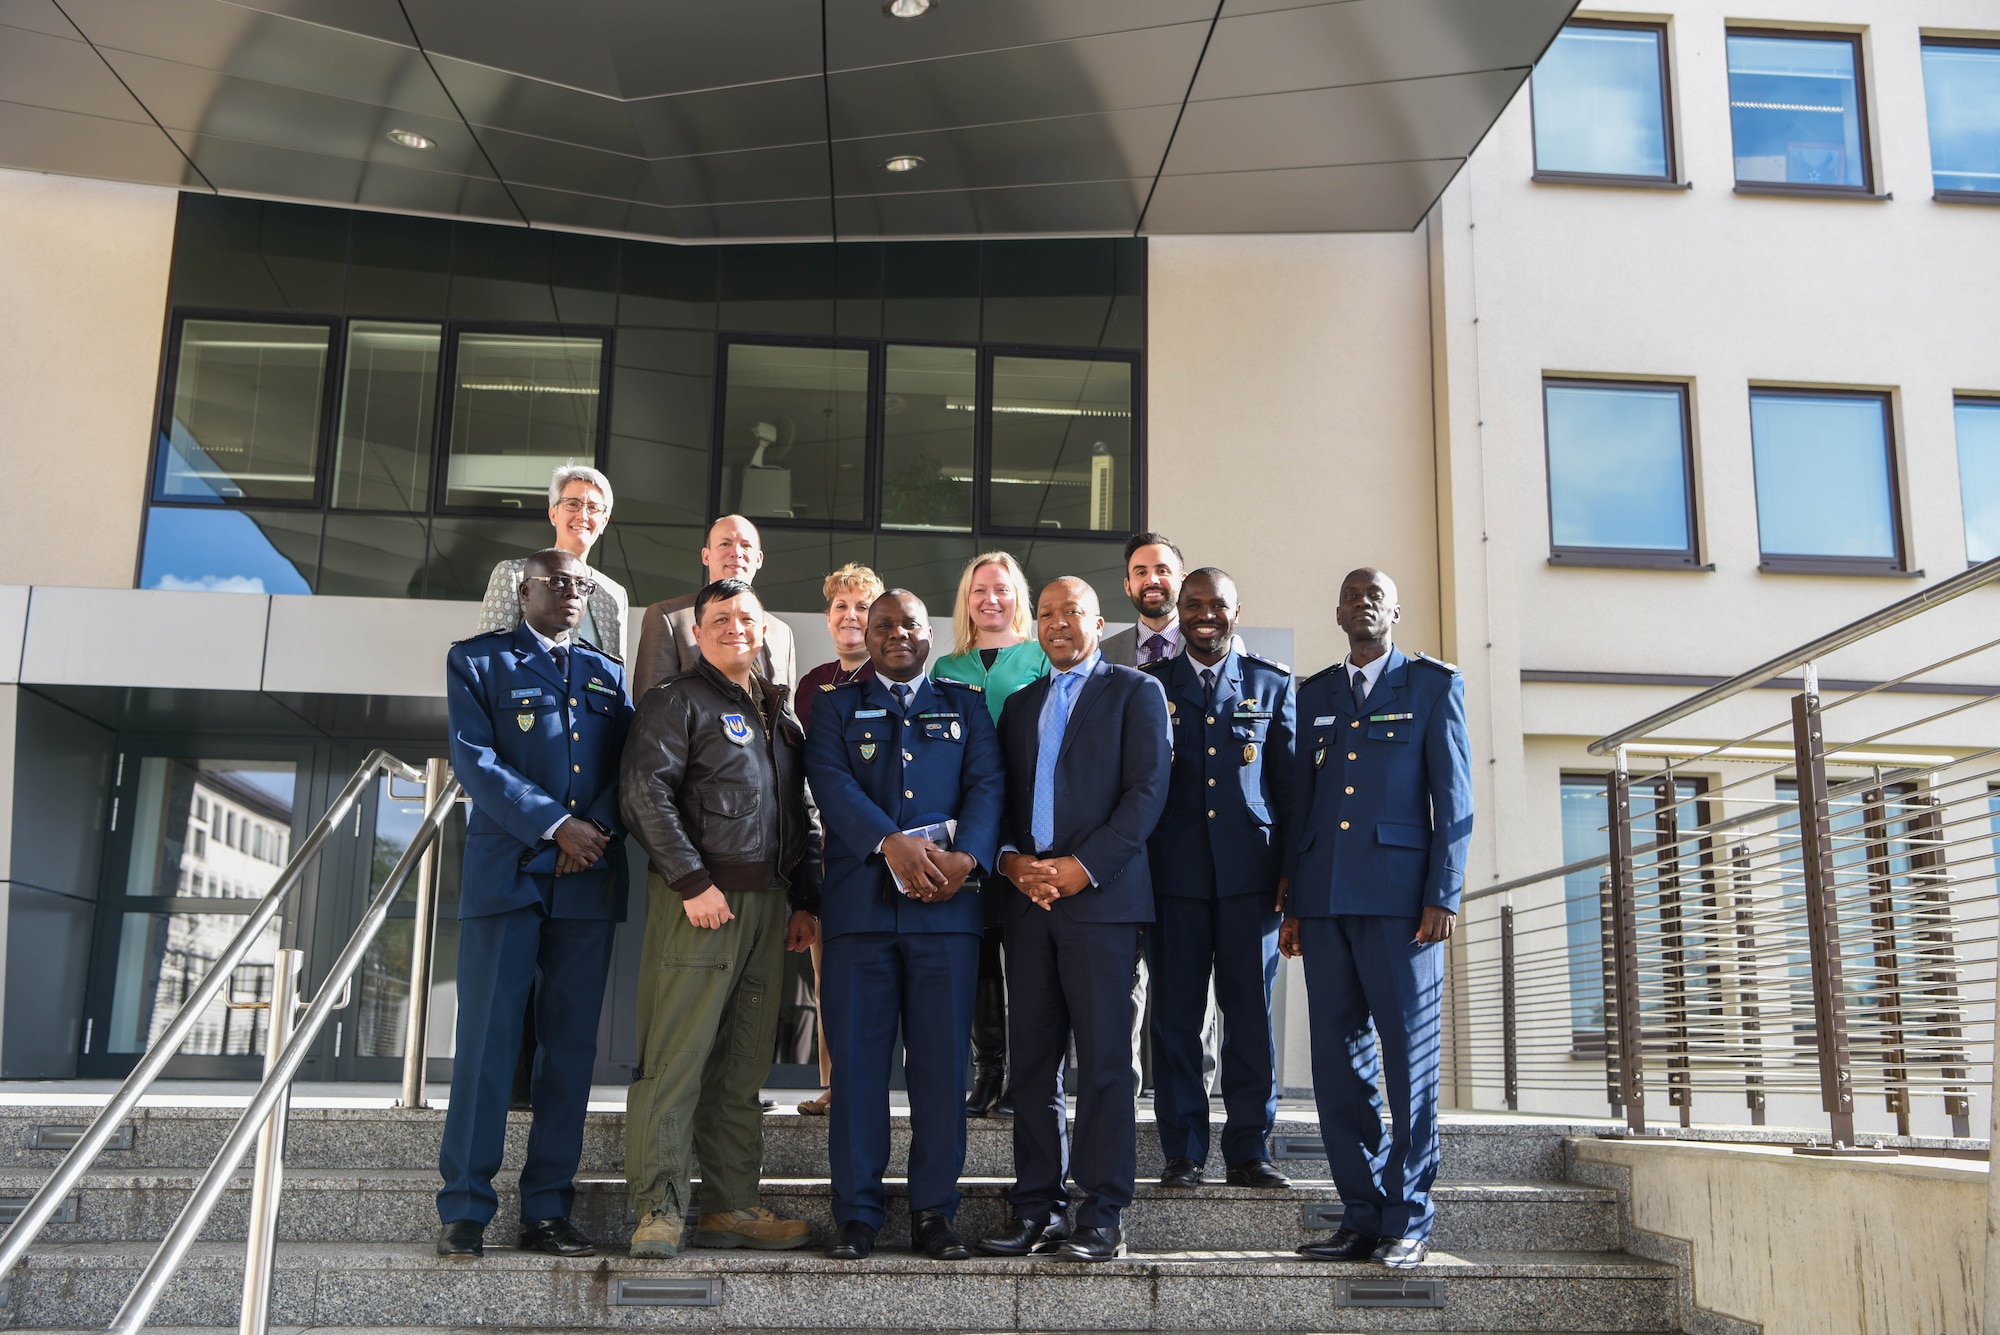 U.S. Air Force Col. Ric Trimillos, U.S. Air Forces in Europe and Africa International Affairs Division chief, and Department of Defense civilians pose with the official party from the Senegal Air Force on Ramstein Air Base, Germany, Feb. 16, 2018. The official party consists of Col. Alimbaye Manga, Senegal Air Force Chief of Staff flight safety advisor, Lt. Col. Aliou Faye, Human Resources Division chief, Maj. Mamadou Wathie, Logistics Division chief, and Capt. Momar Ndiaye, Dakar Operational Center chief and transport pilot.